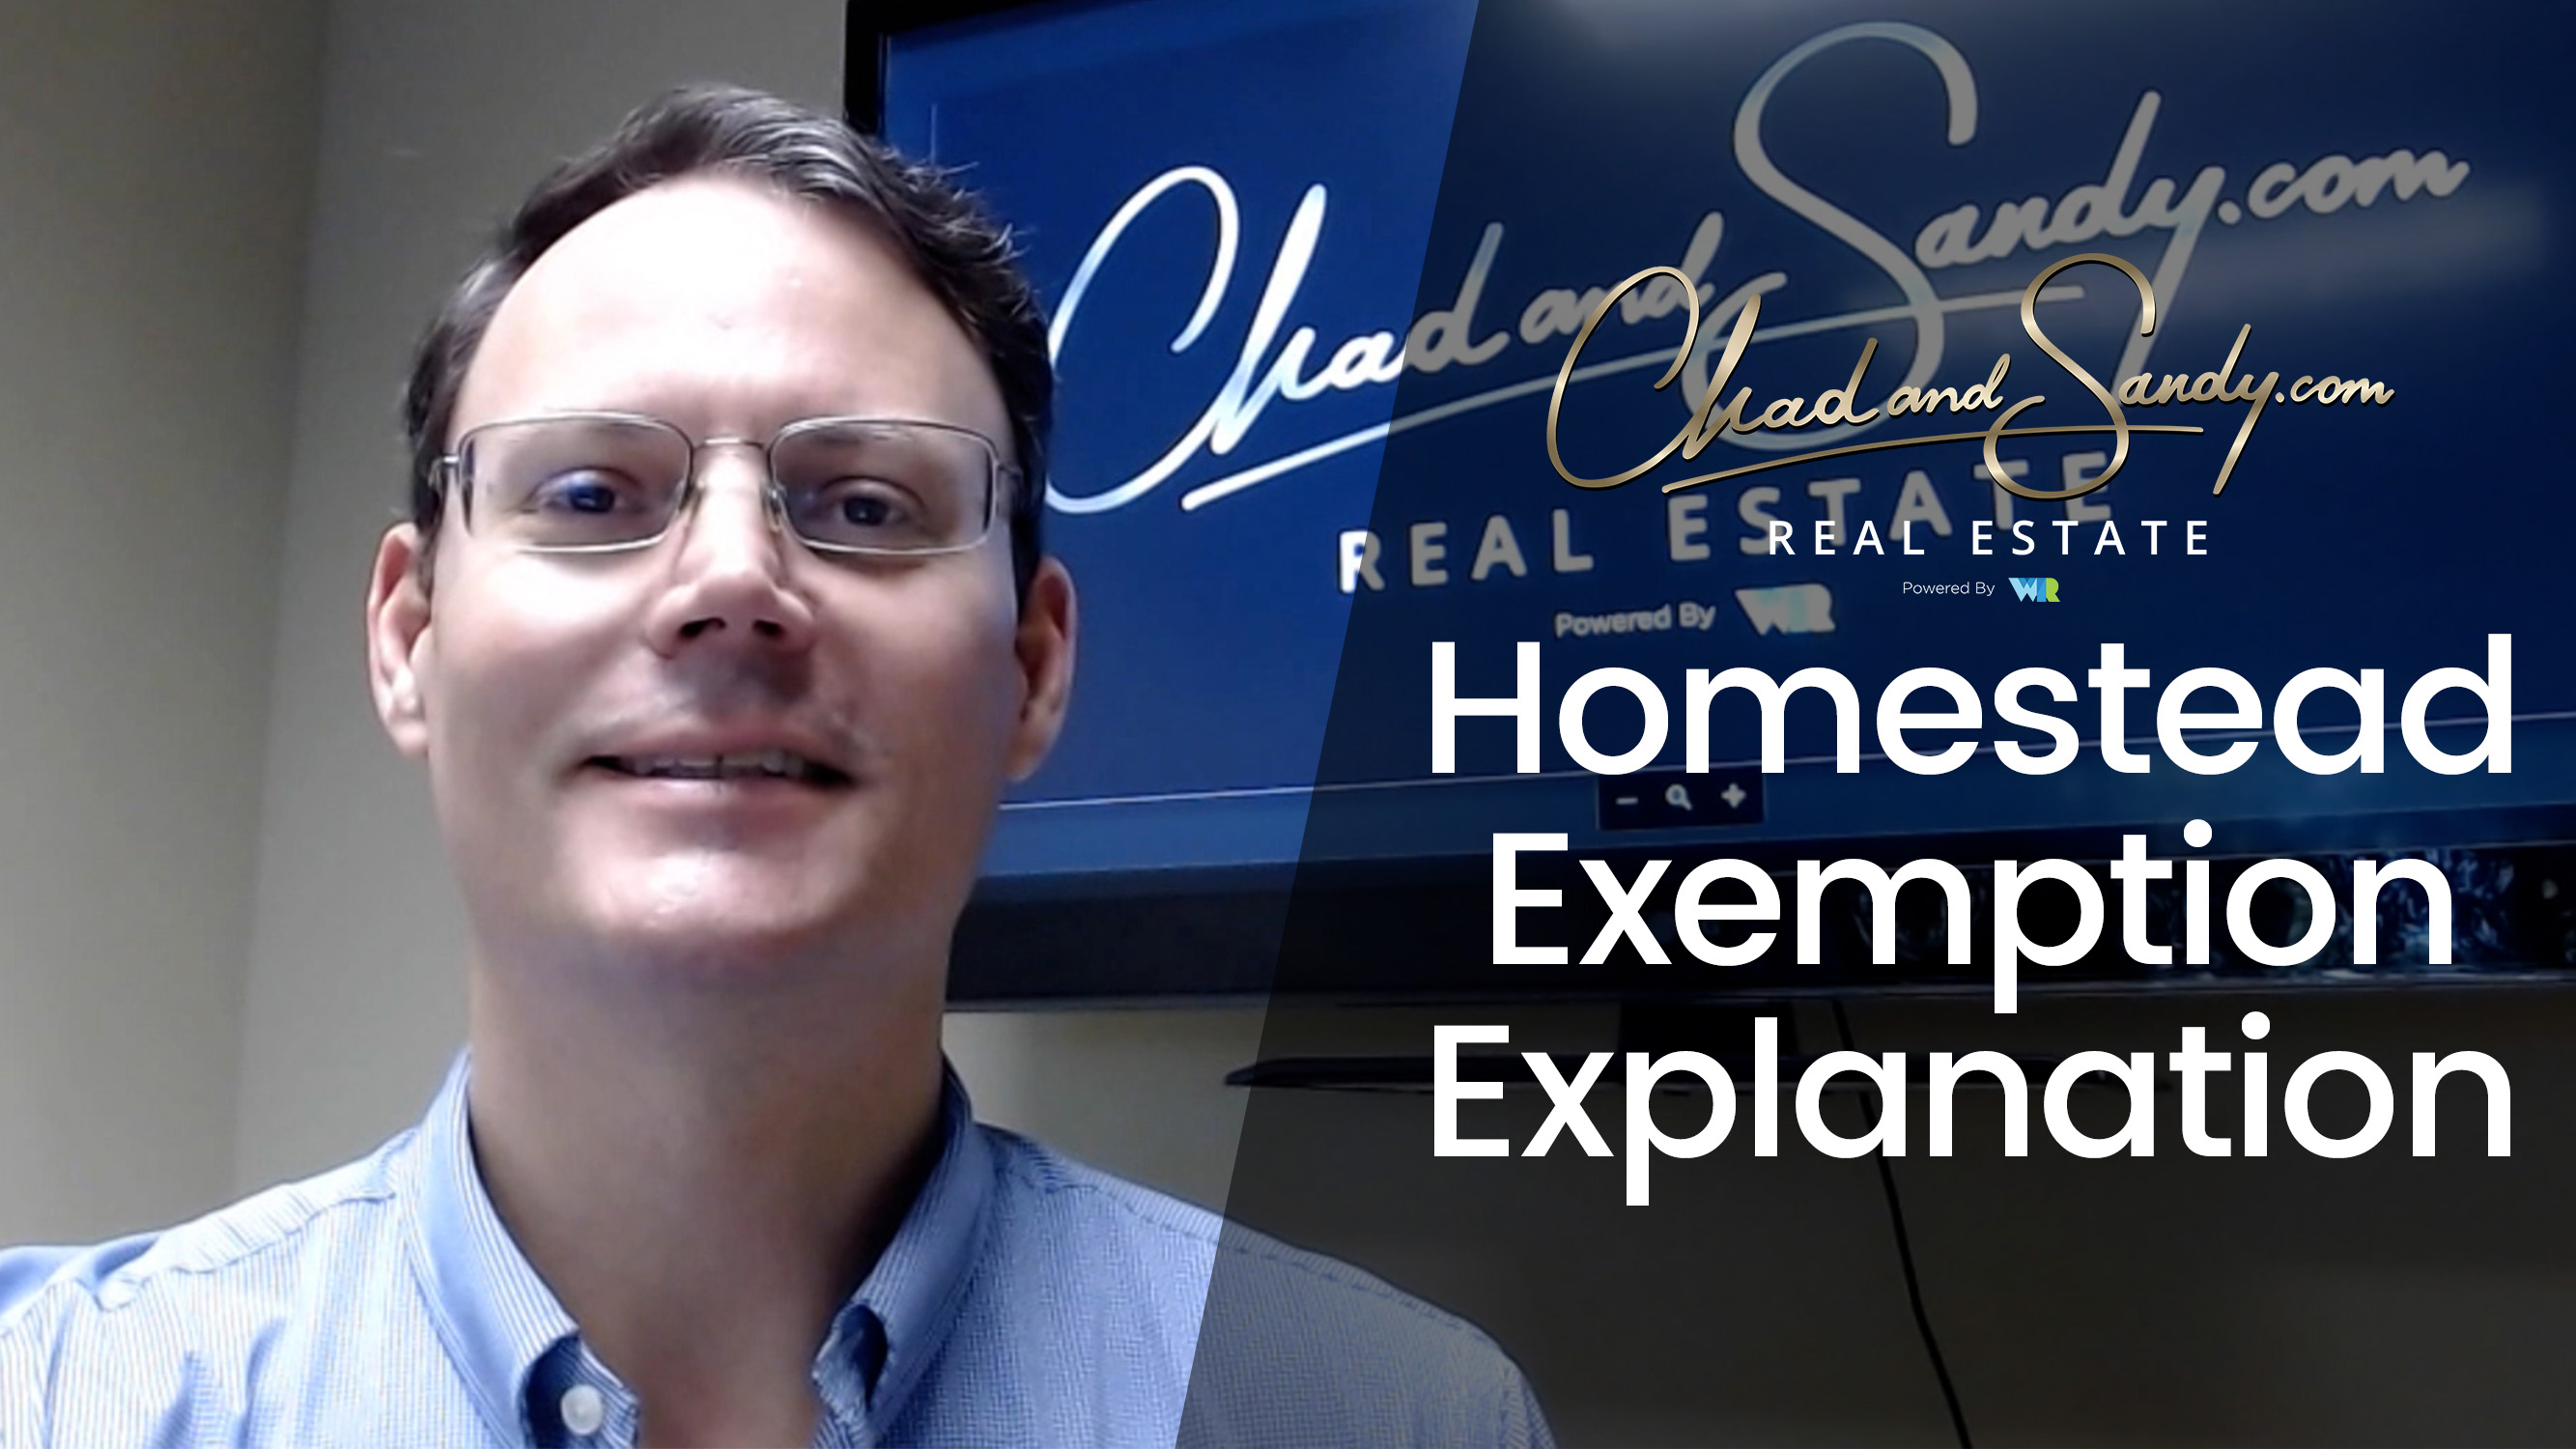 Some Quick Advice About Homestead Exemptions